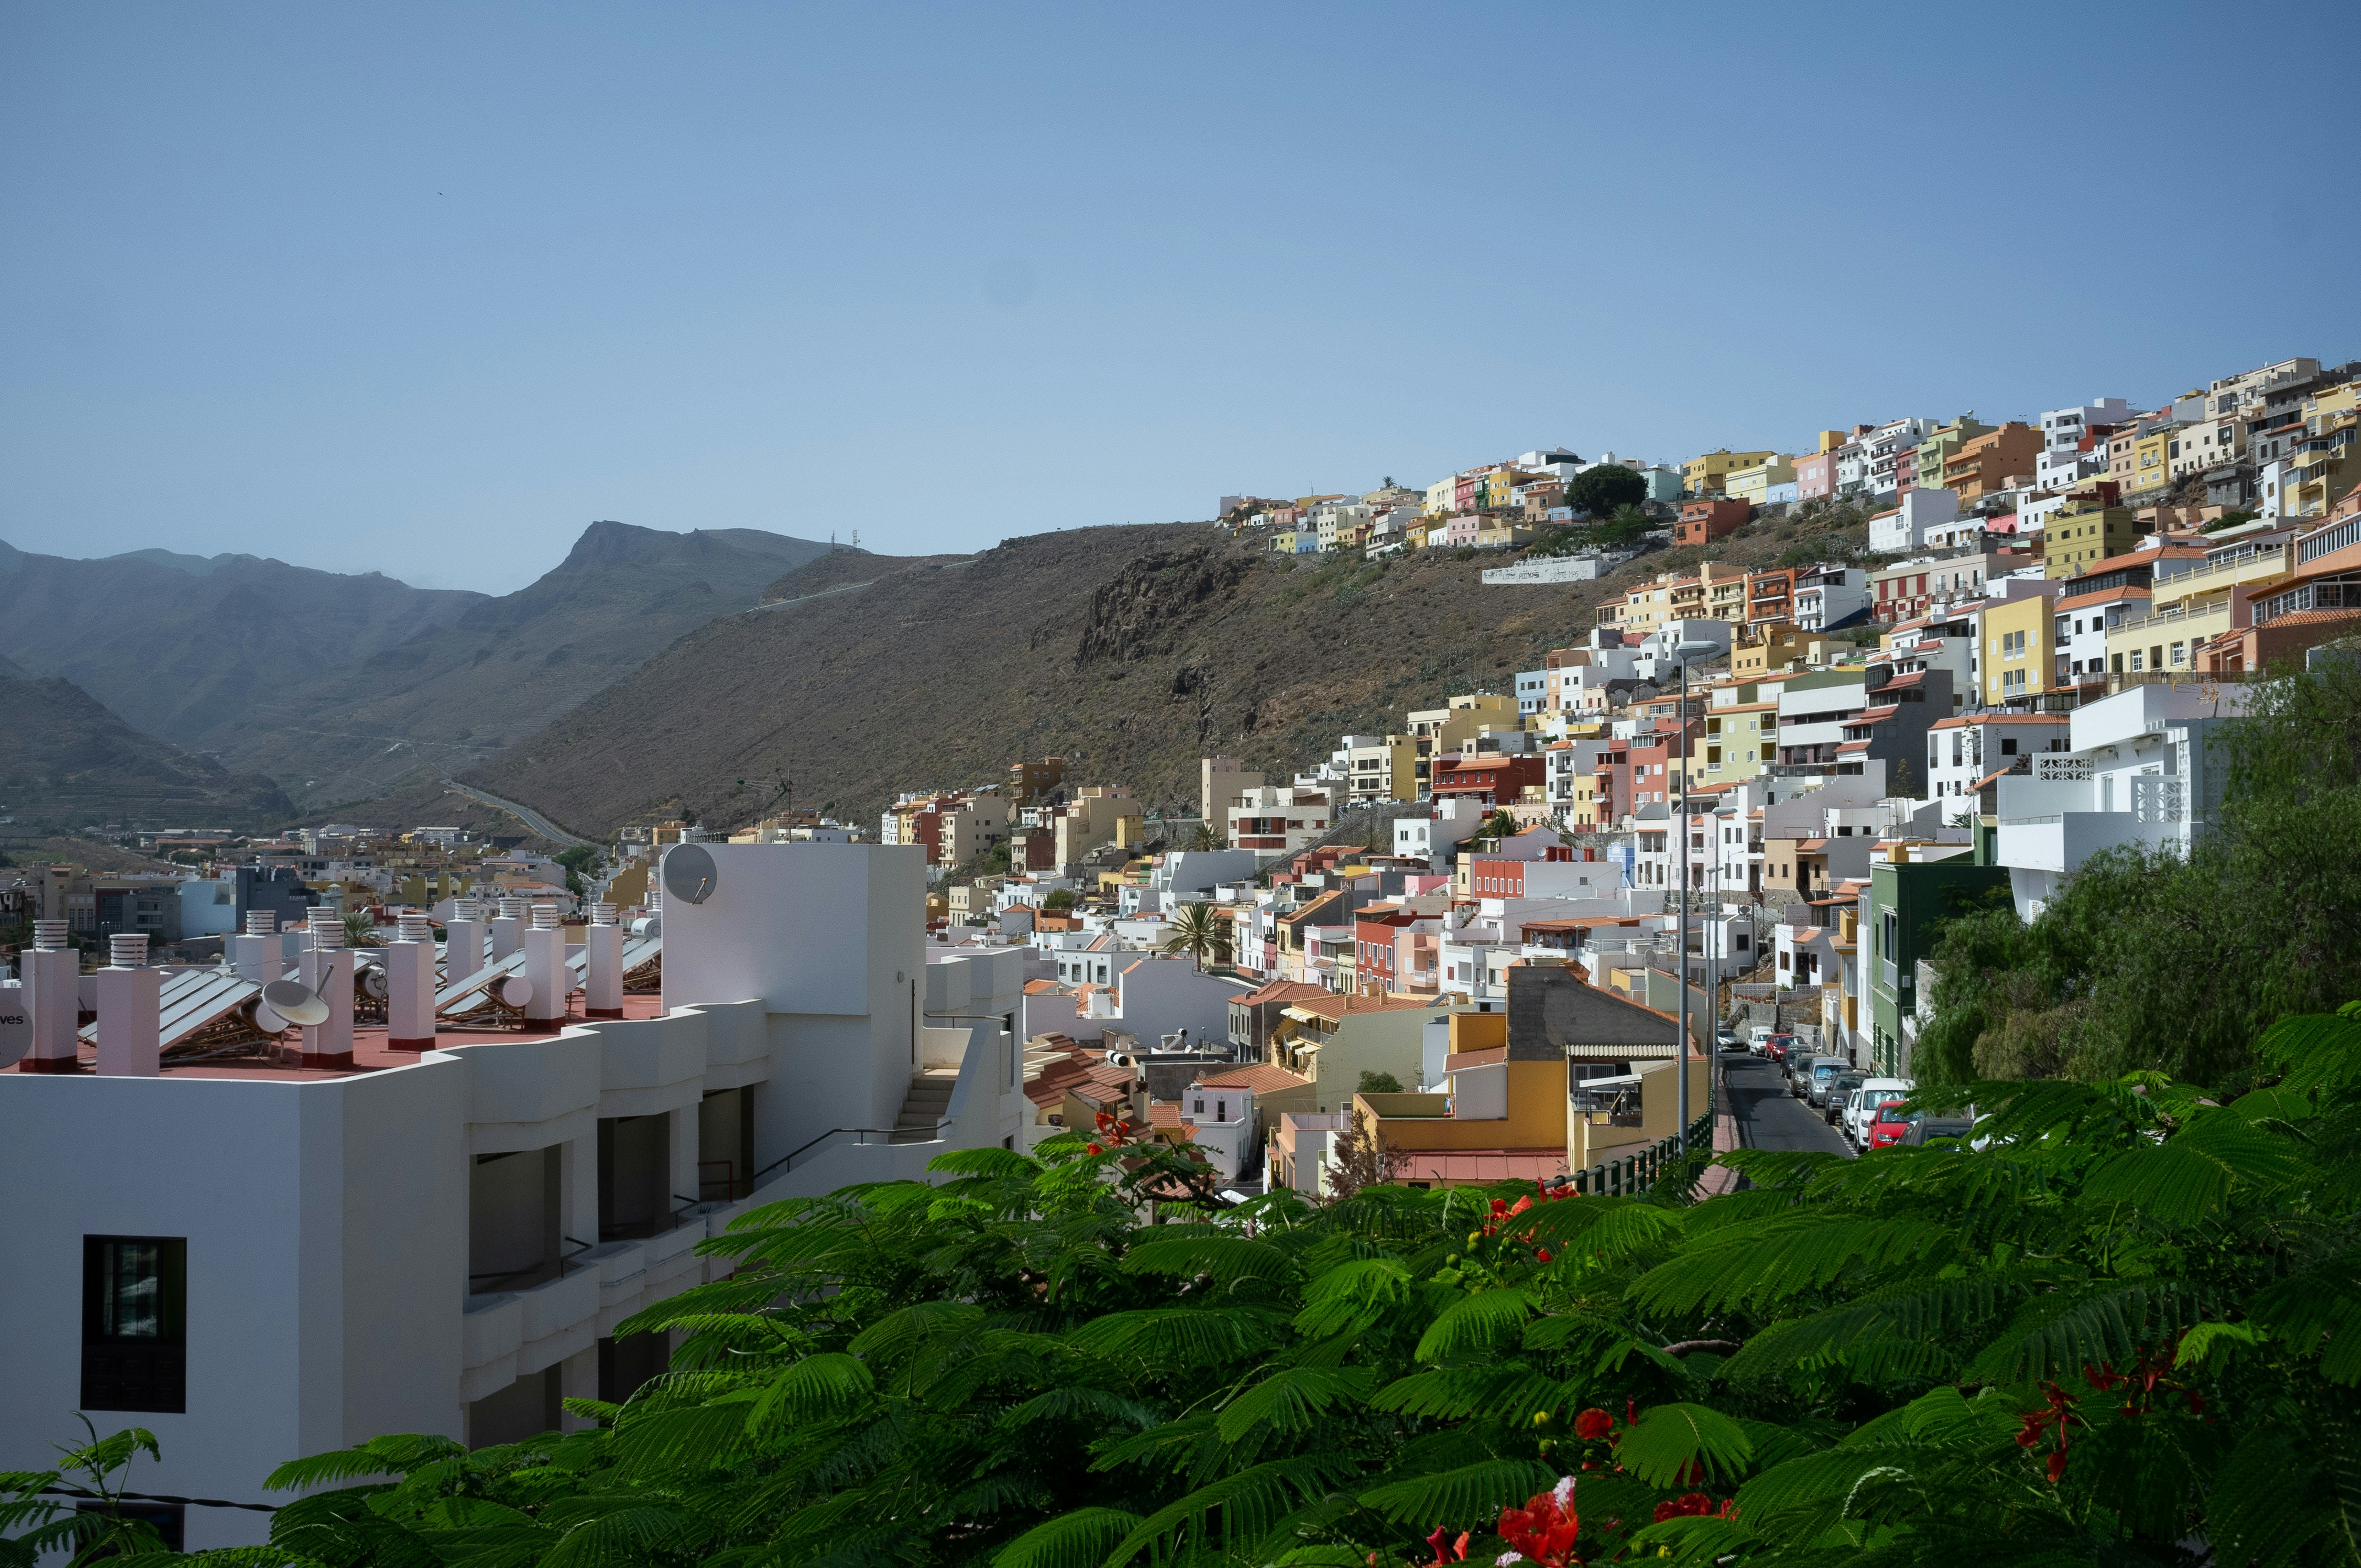 La Gomera is one of Spain's Canary Islands